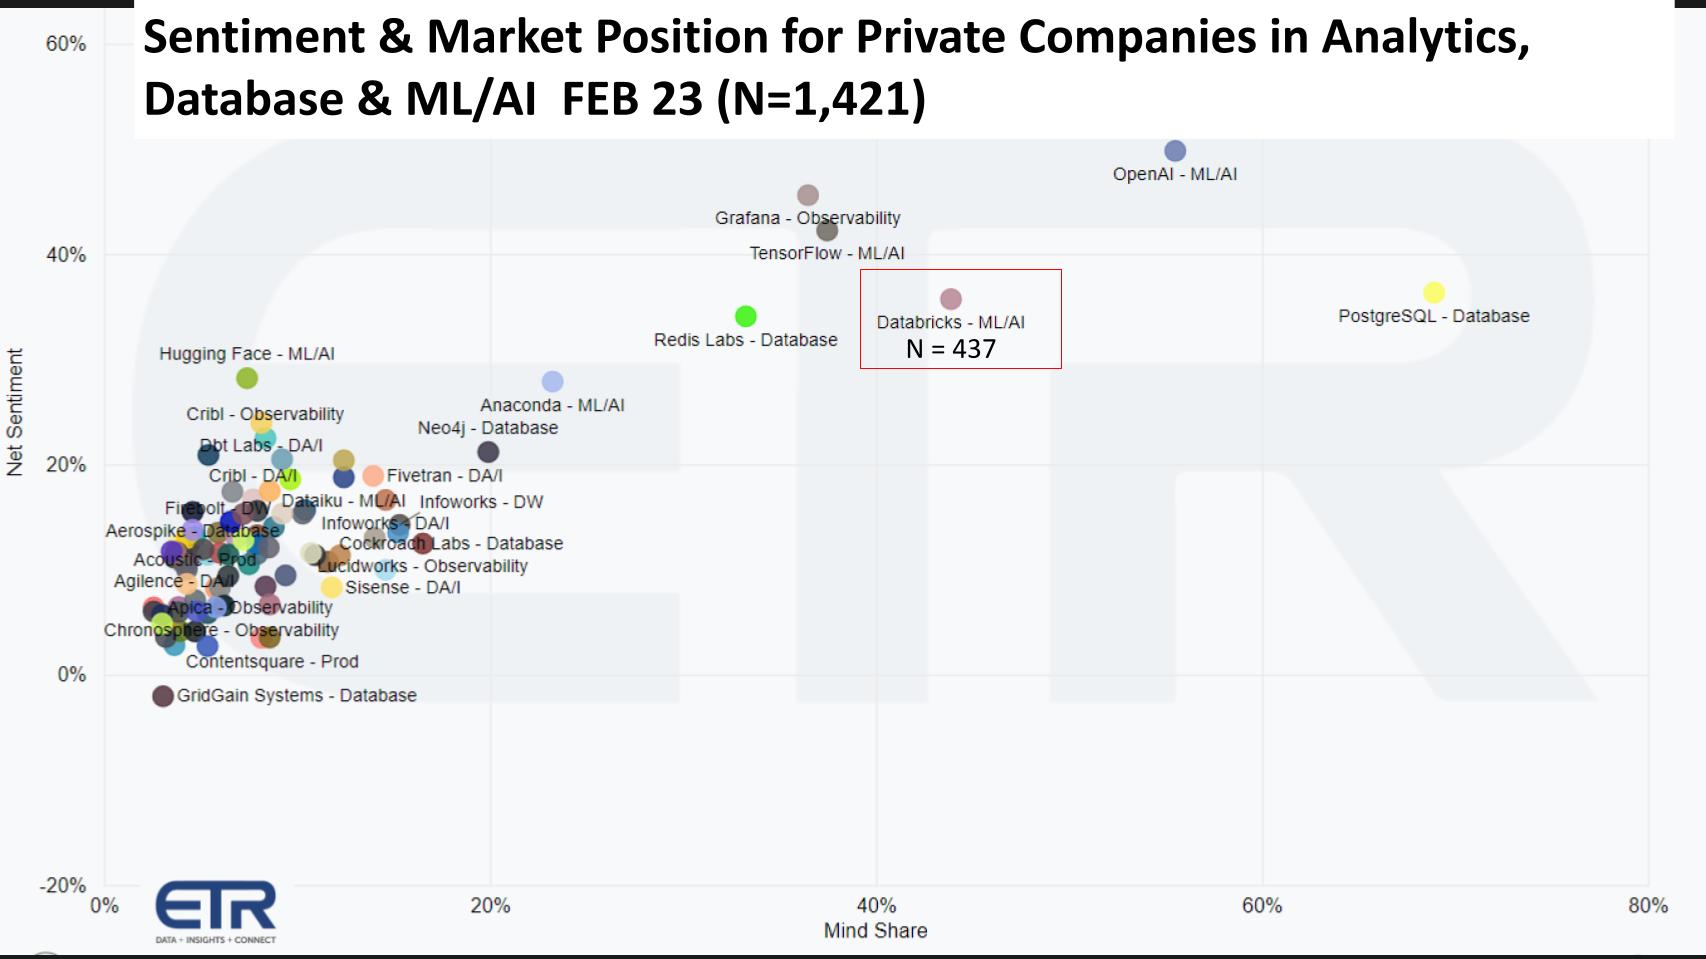 Databricks position highlighted within a graph by ETR showing the sentiment and market position for private companies in analytics, database and ML/AI as of Feb 23